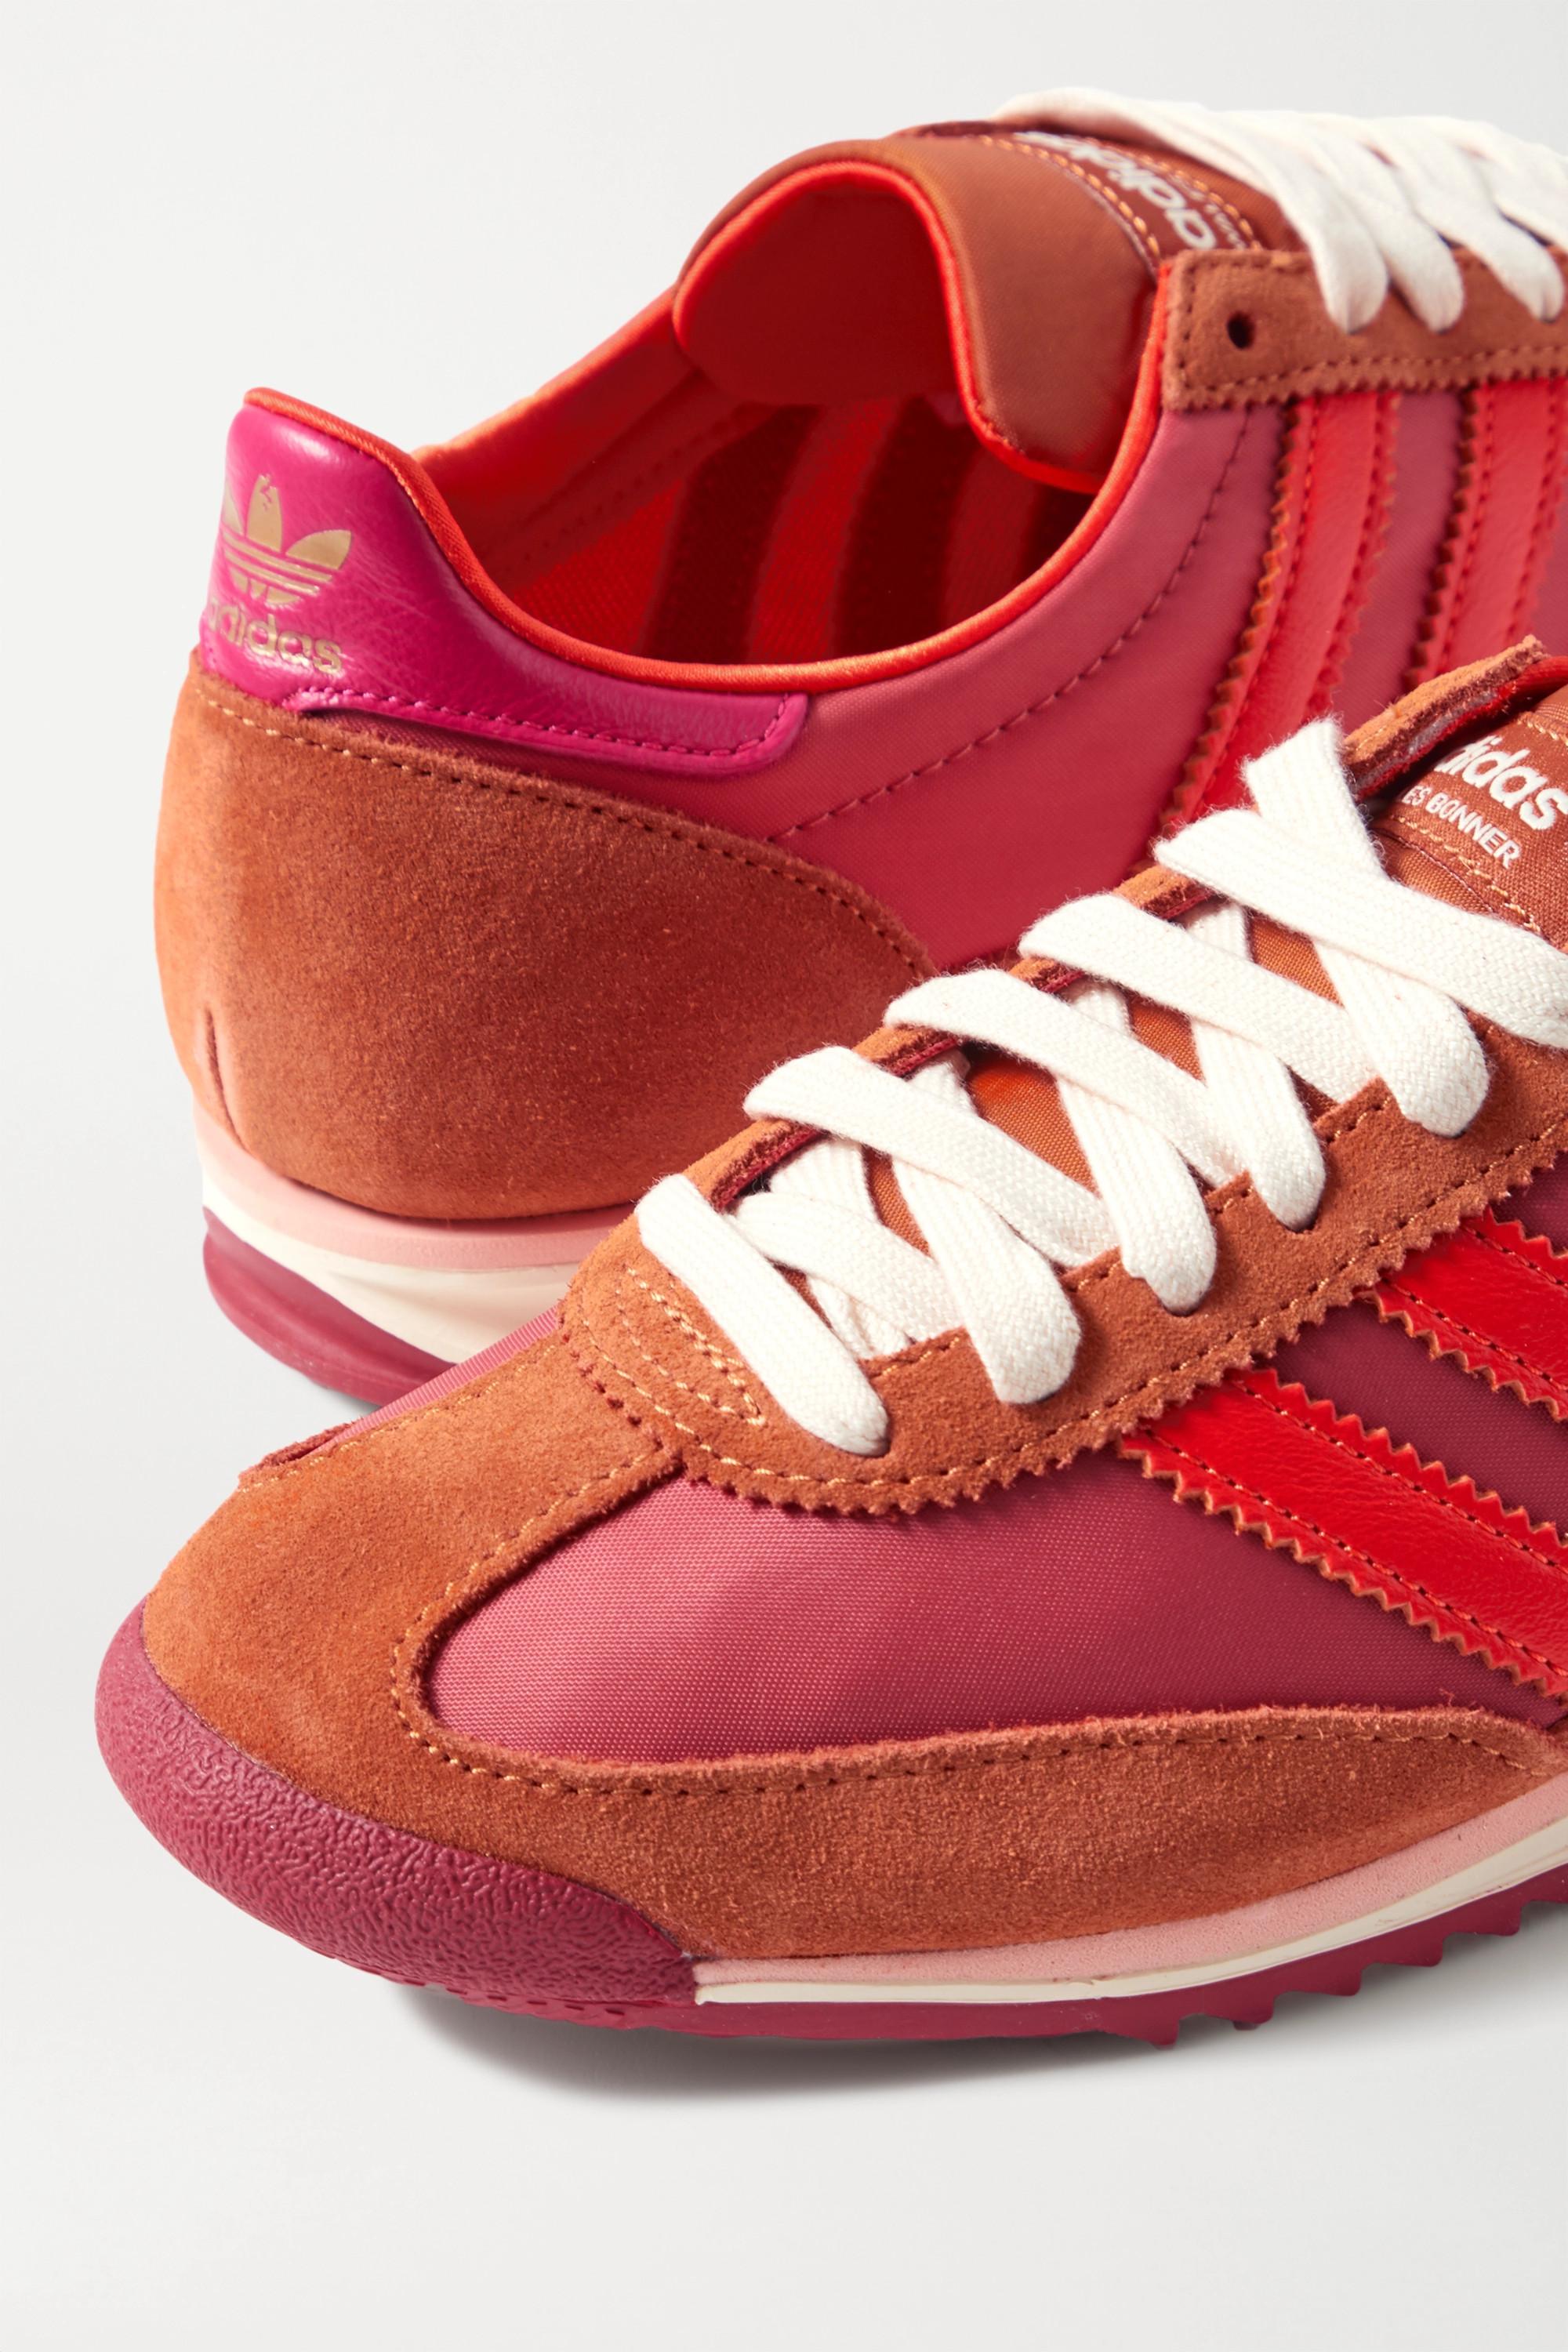 adidas Originals + Wales Bonner Sl 72 Shell, Leather And Suede Sneakers in  Red | Lyst